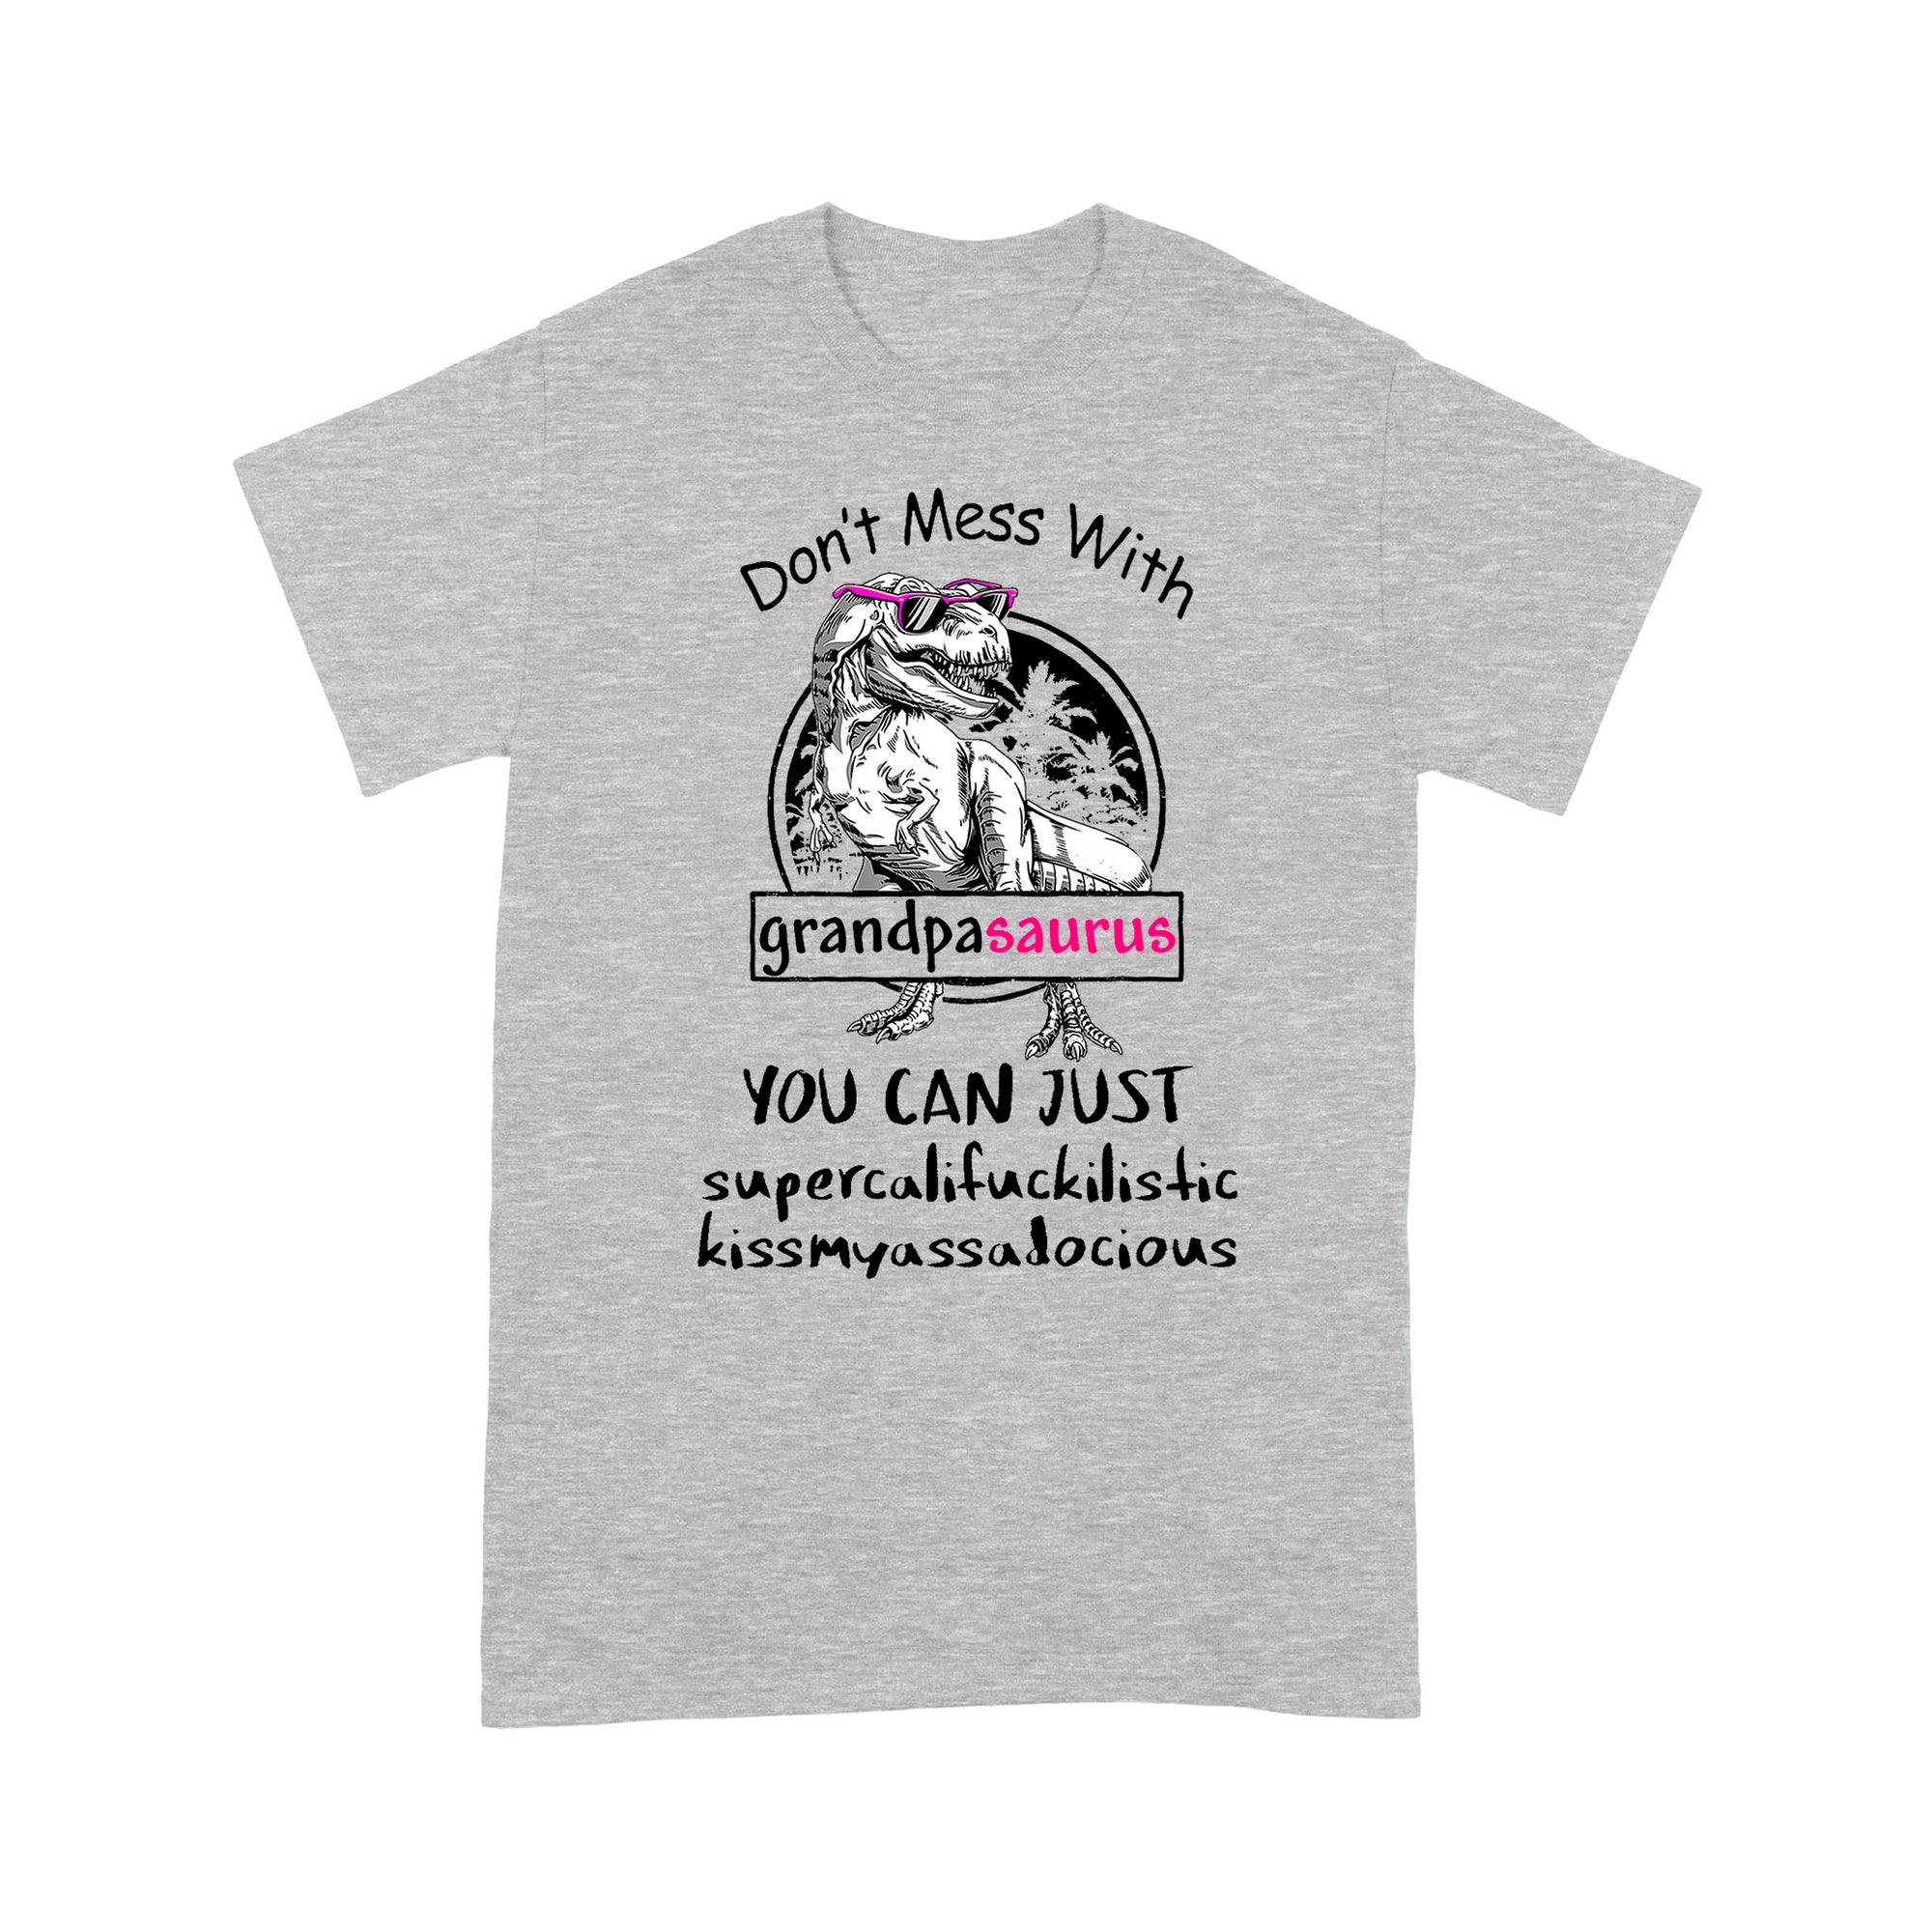 Funny Quotes Dont Mess With Grandpasaurus You Can Just Supercalifuckilistic Sayings Custom Graphic Fathers Day Gifts Ideas For Dad Grandfather Men - Standard T-shirt